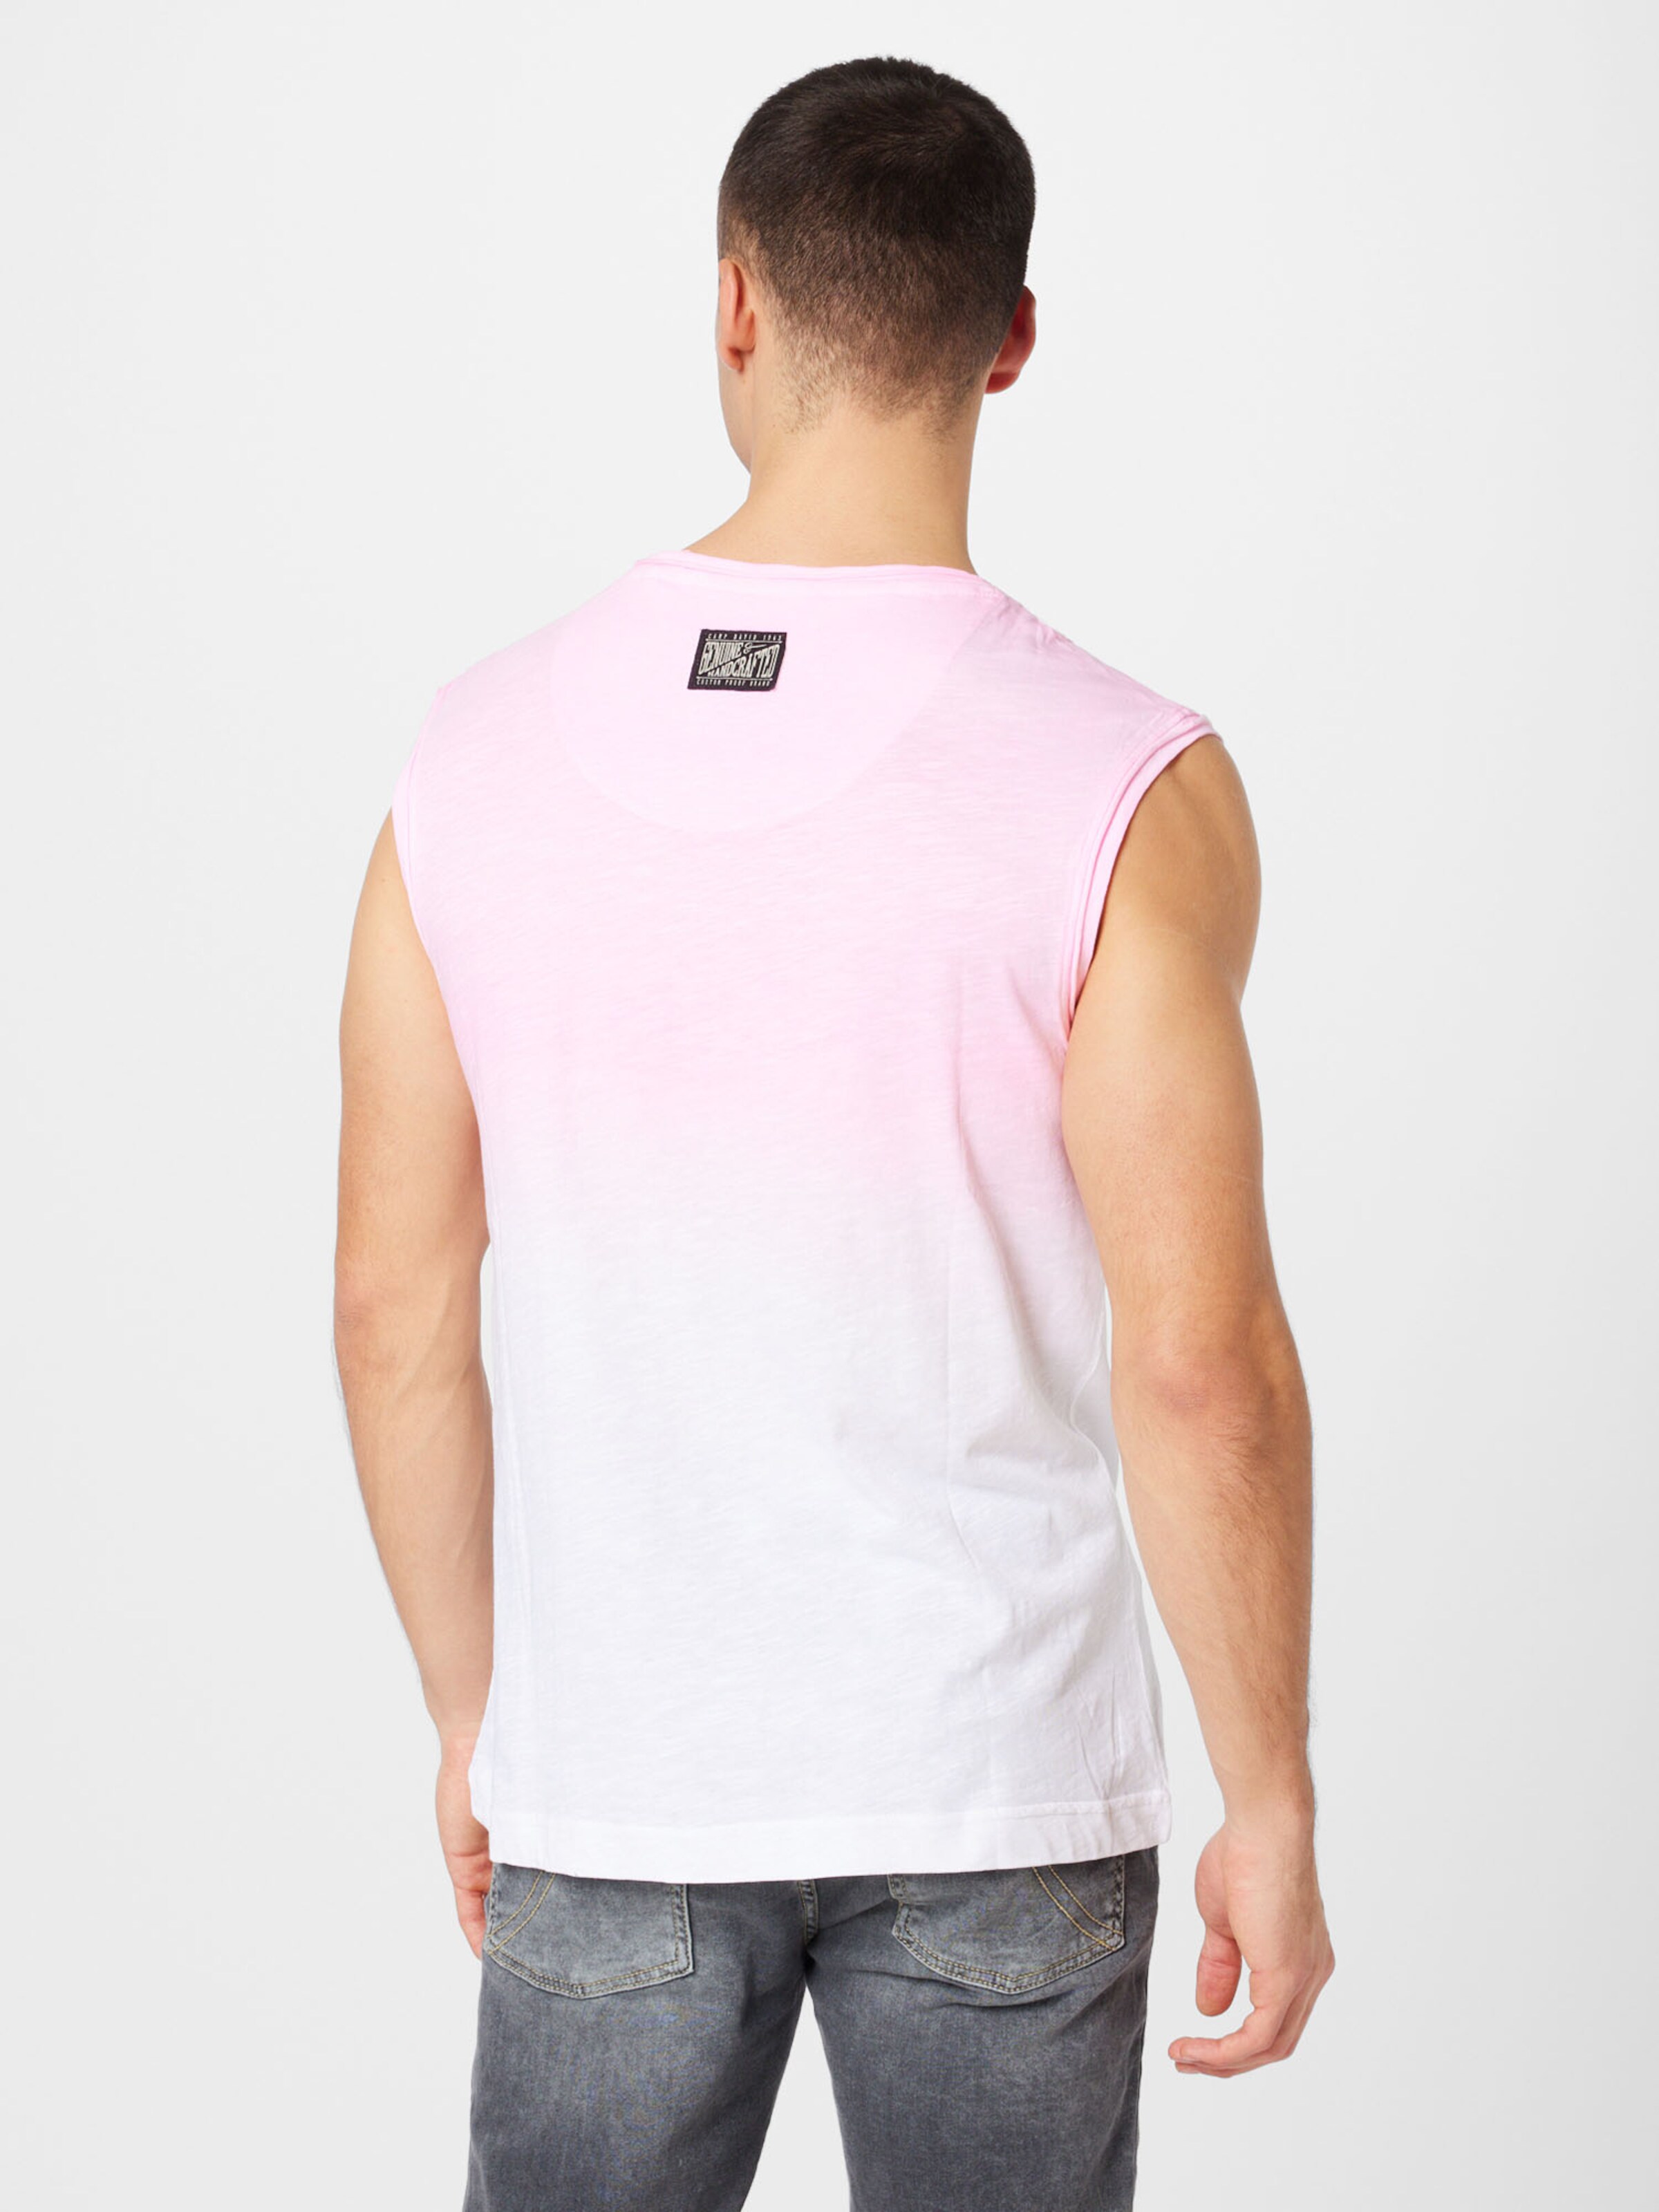 CAMP DAVID T-Shirt in ABOUT YOU | Neonpink